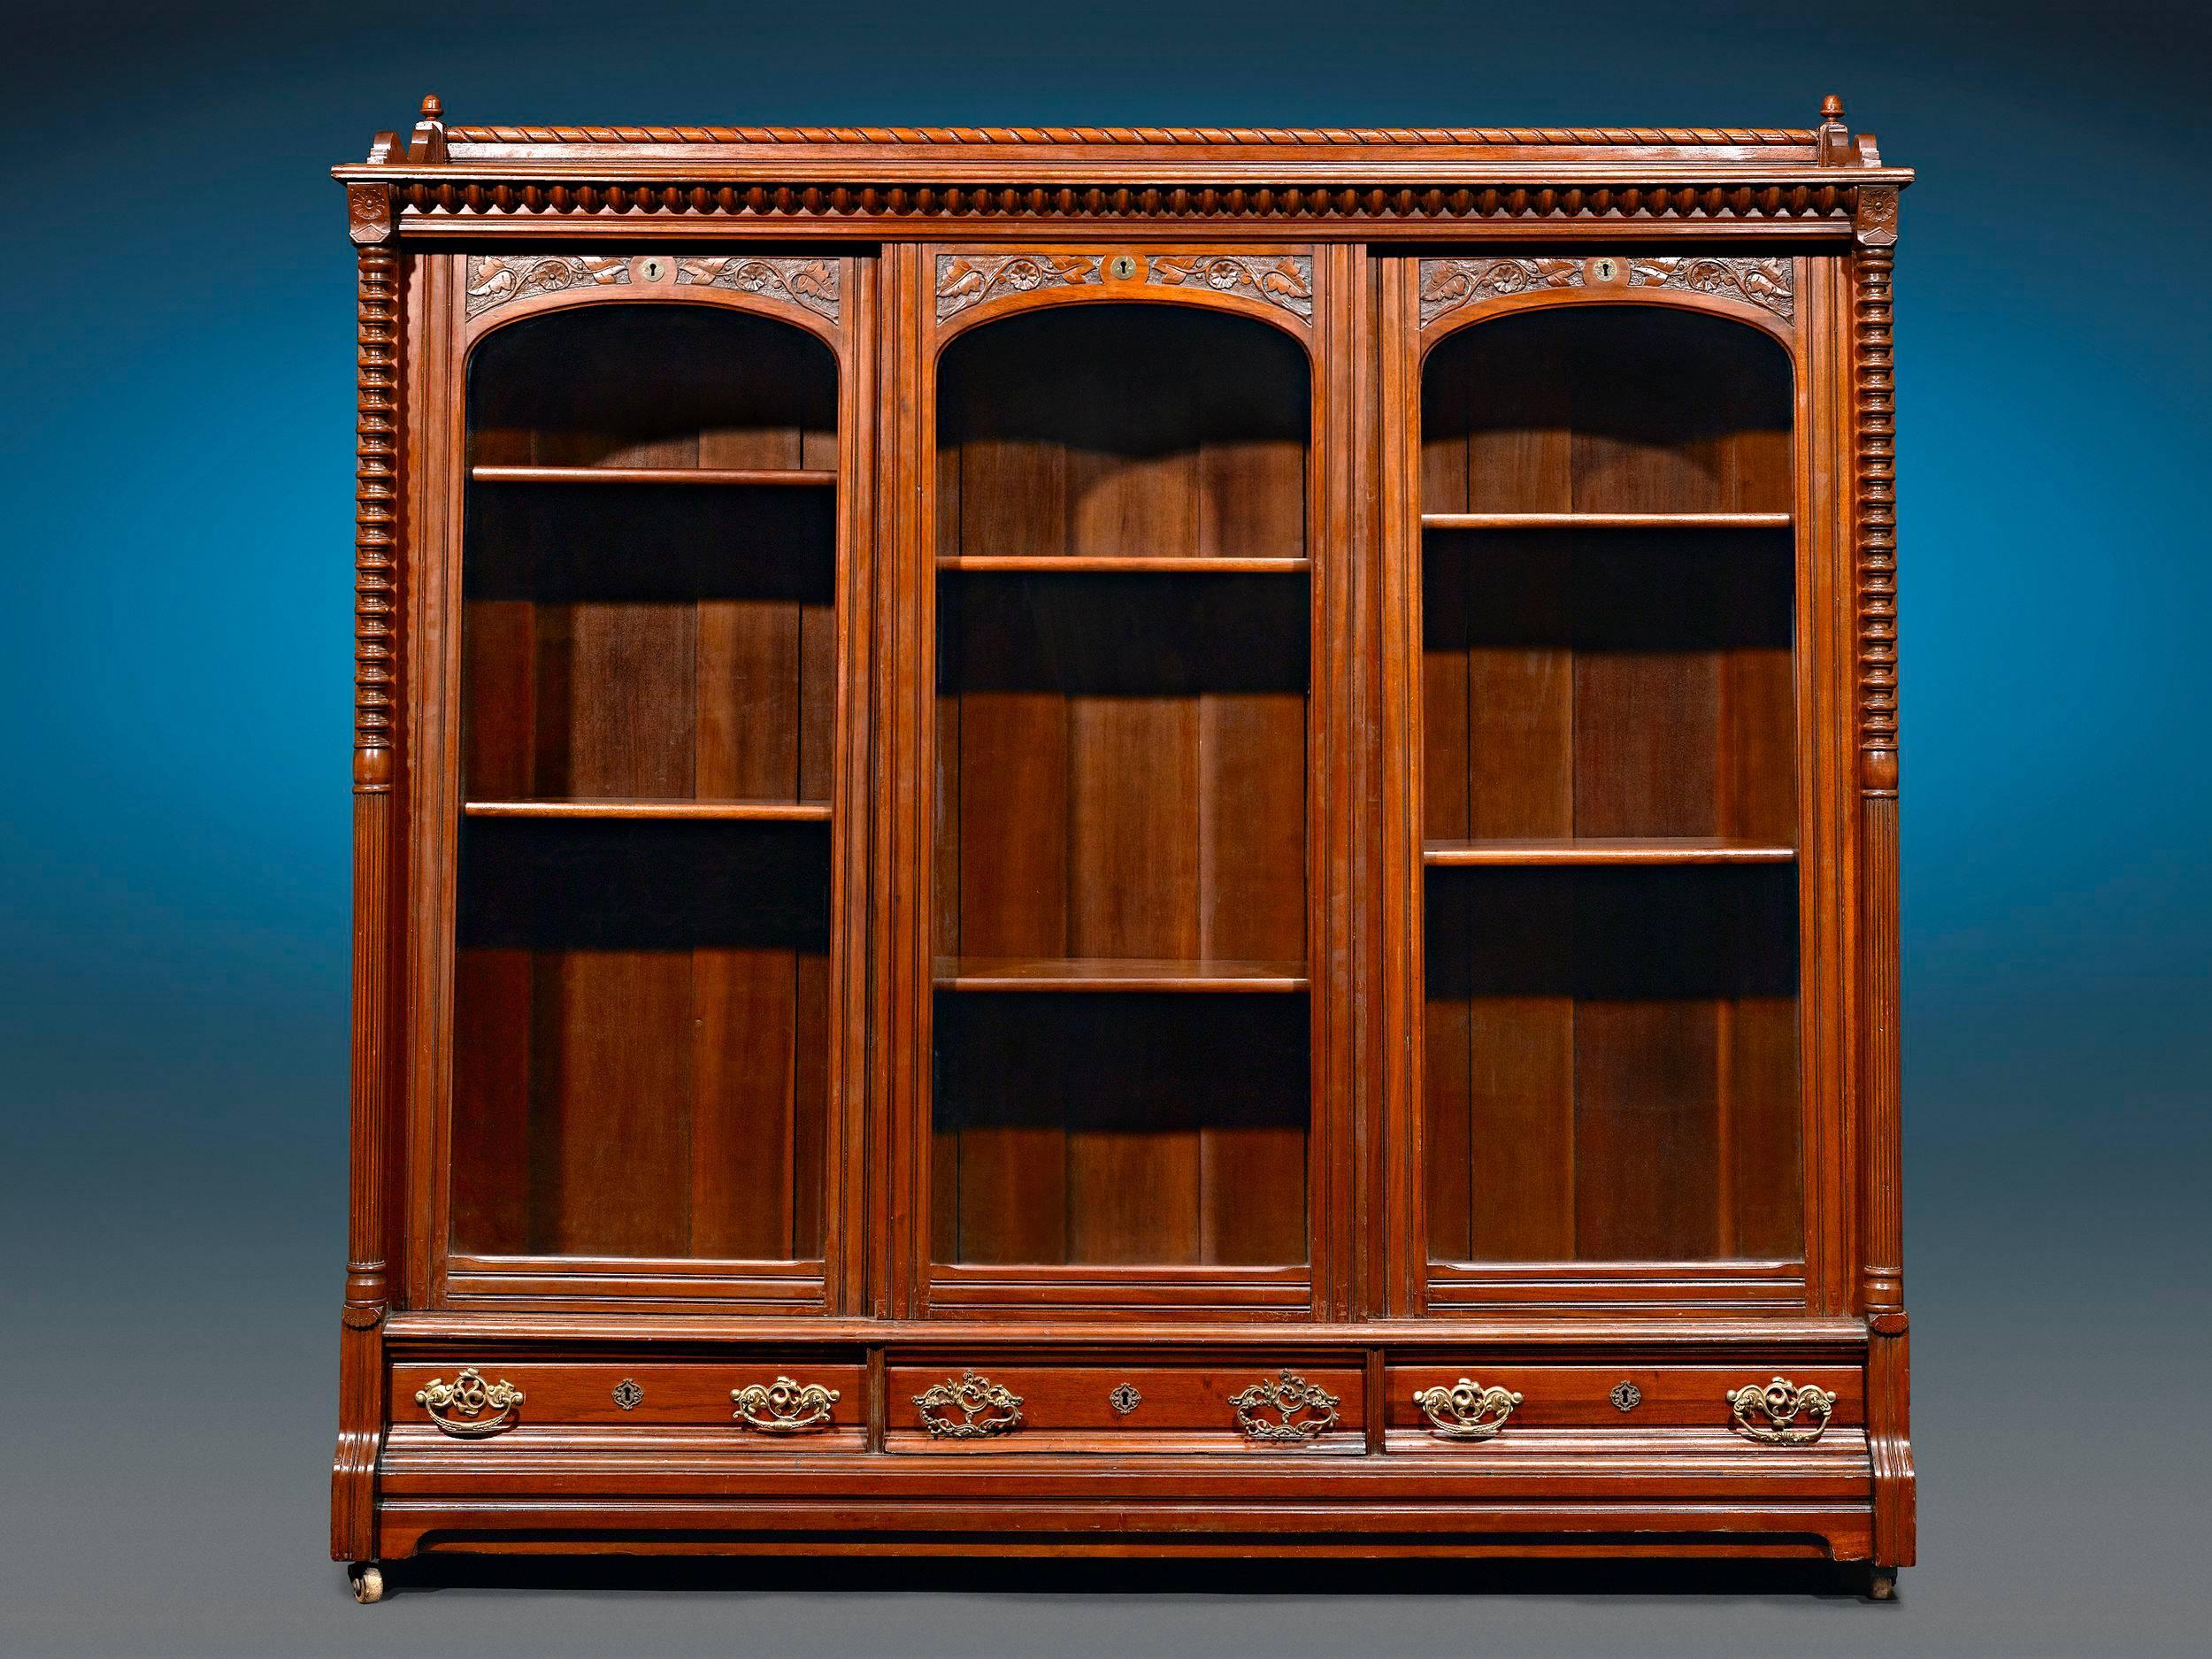 Crafted of luxurious mahogany, this magnificent English bookcase captures the elegance of the Victorian period in grand style. Balanced and beautifully proportioned, the exceptional cabinet is perfect for displaying one's most prized texts and